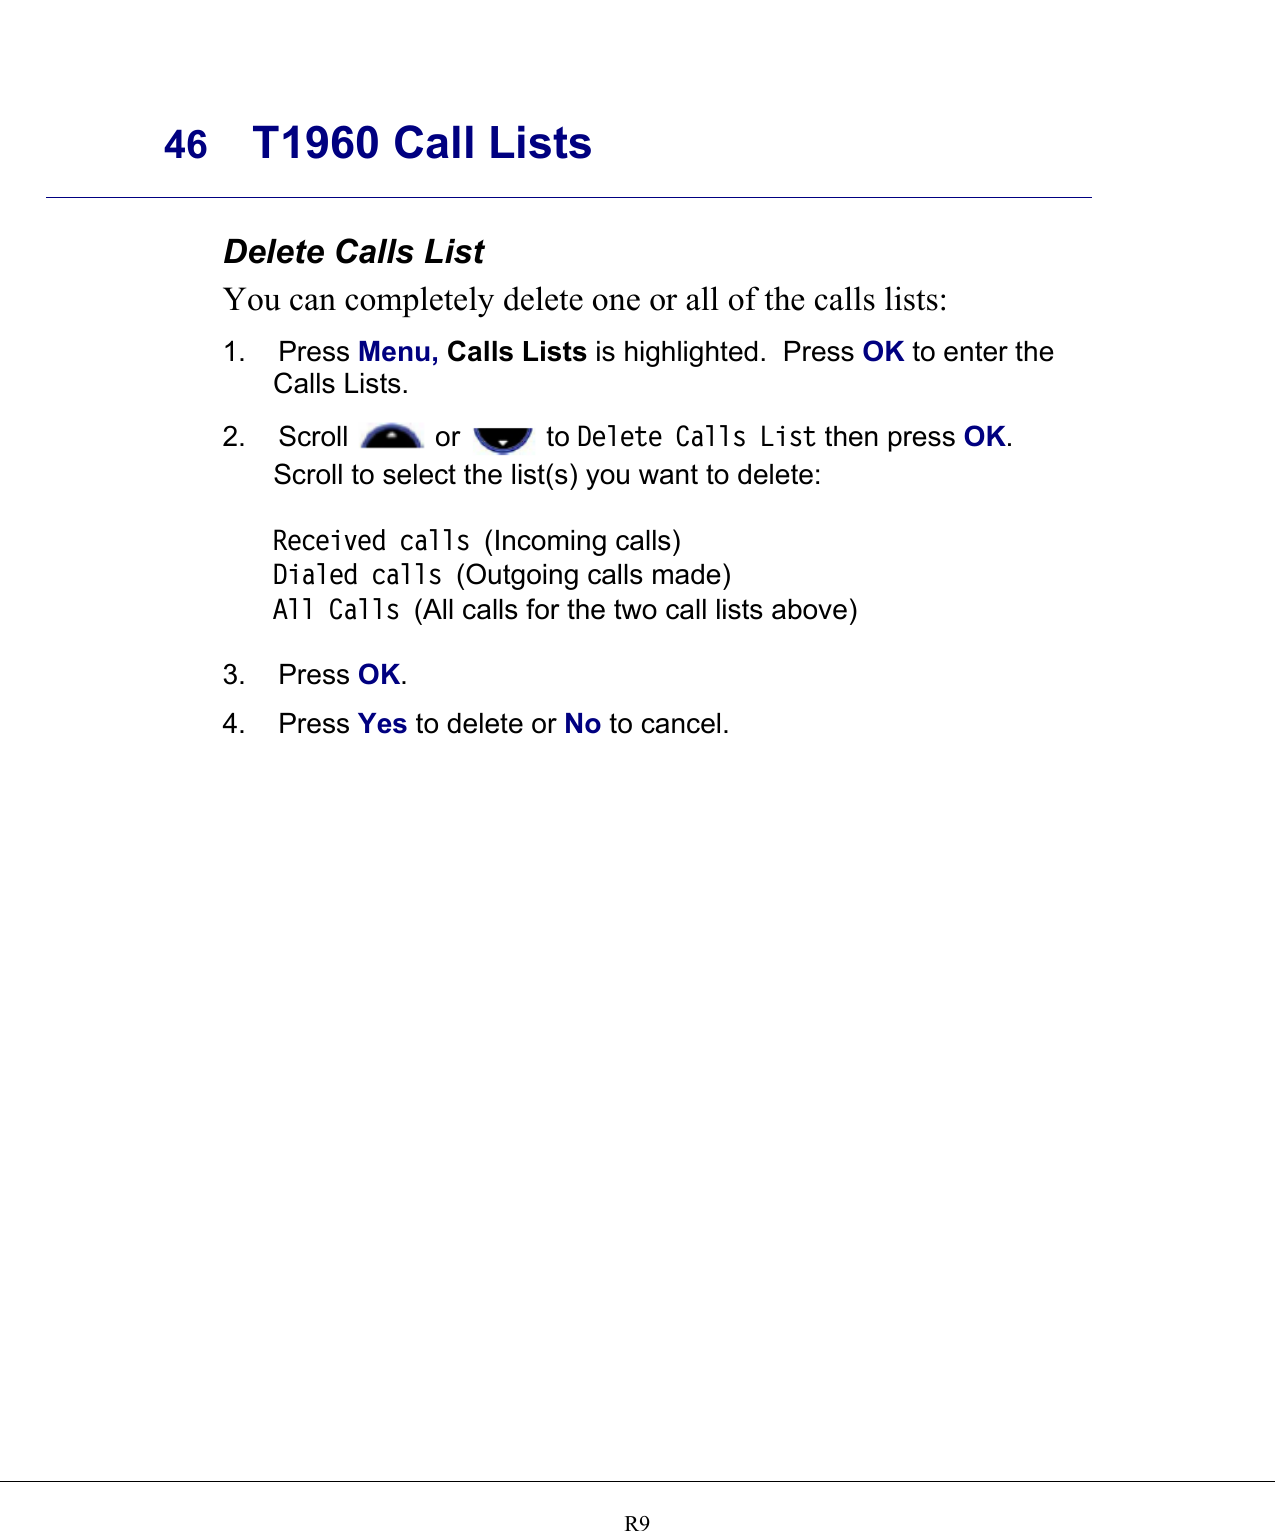     46 T1960 Call Lists    R9Delete Calls List You can completely delete one or all of the calls lists: 1. Press Menu, Calls Lists is highlighted.  Press OK to enter the Calls Lists. 2. Scroll   or   to Delete Calls List then press OK.  Scroll to select the list(s) you want to delete:  Received calls (Incoming calls) Dialed calls (Outgoing calls made) All Calls (All calls for the two call lists above)  3. Press OK. 4. Press Yes to delete or No to cancel.     